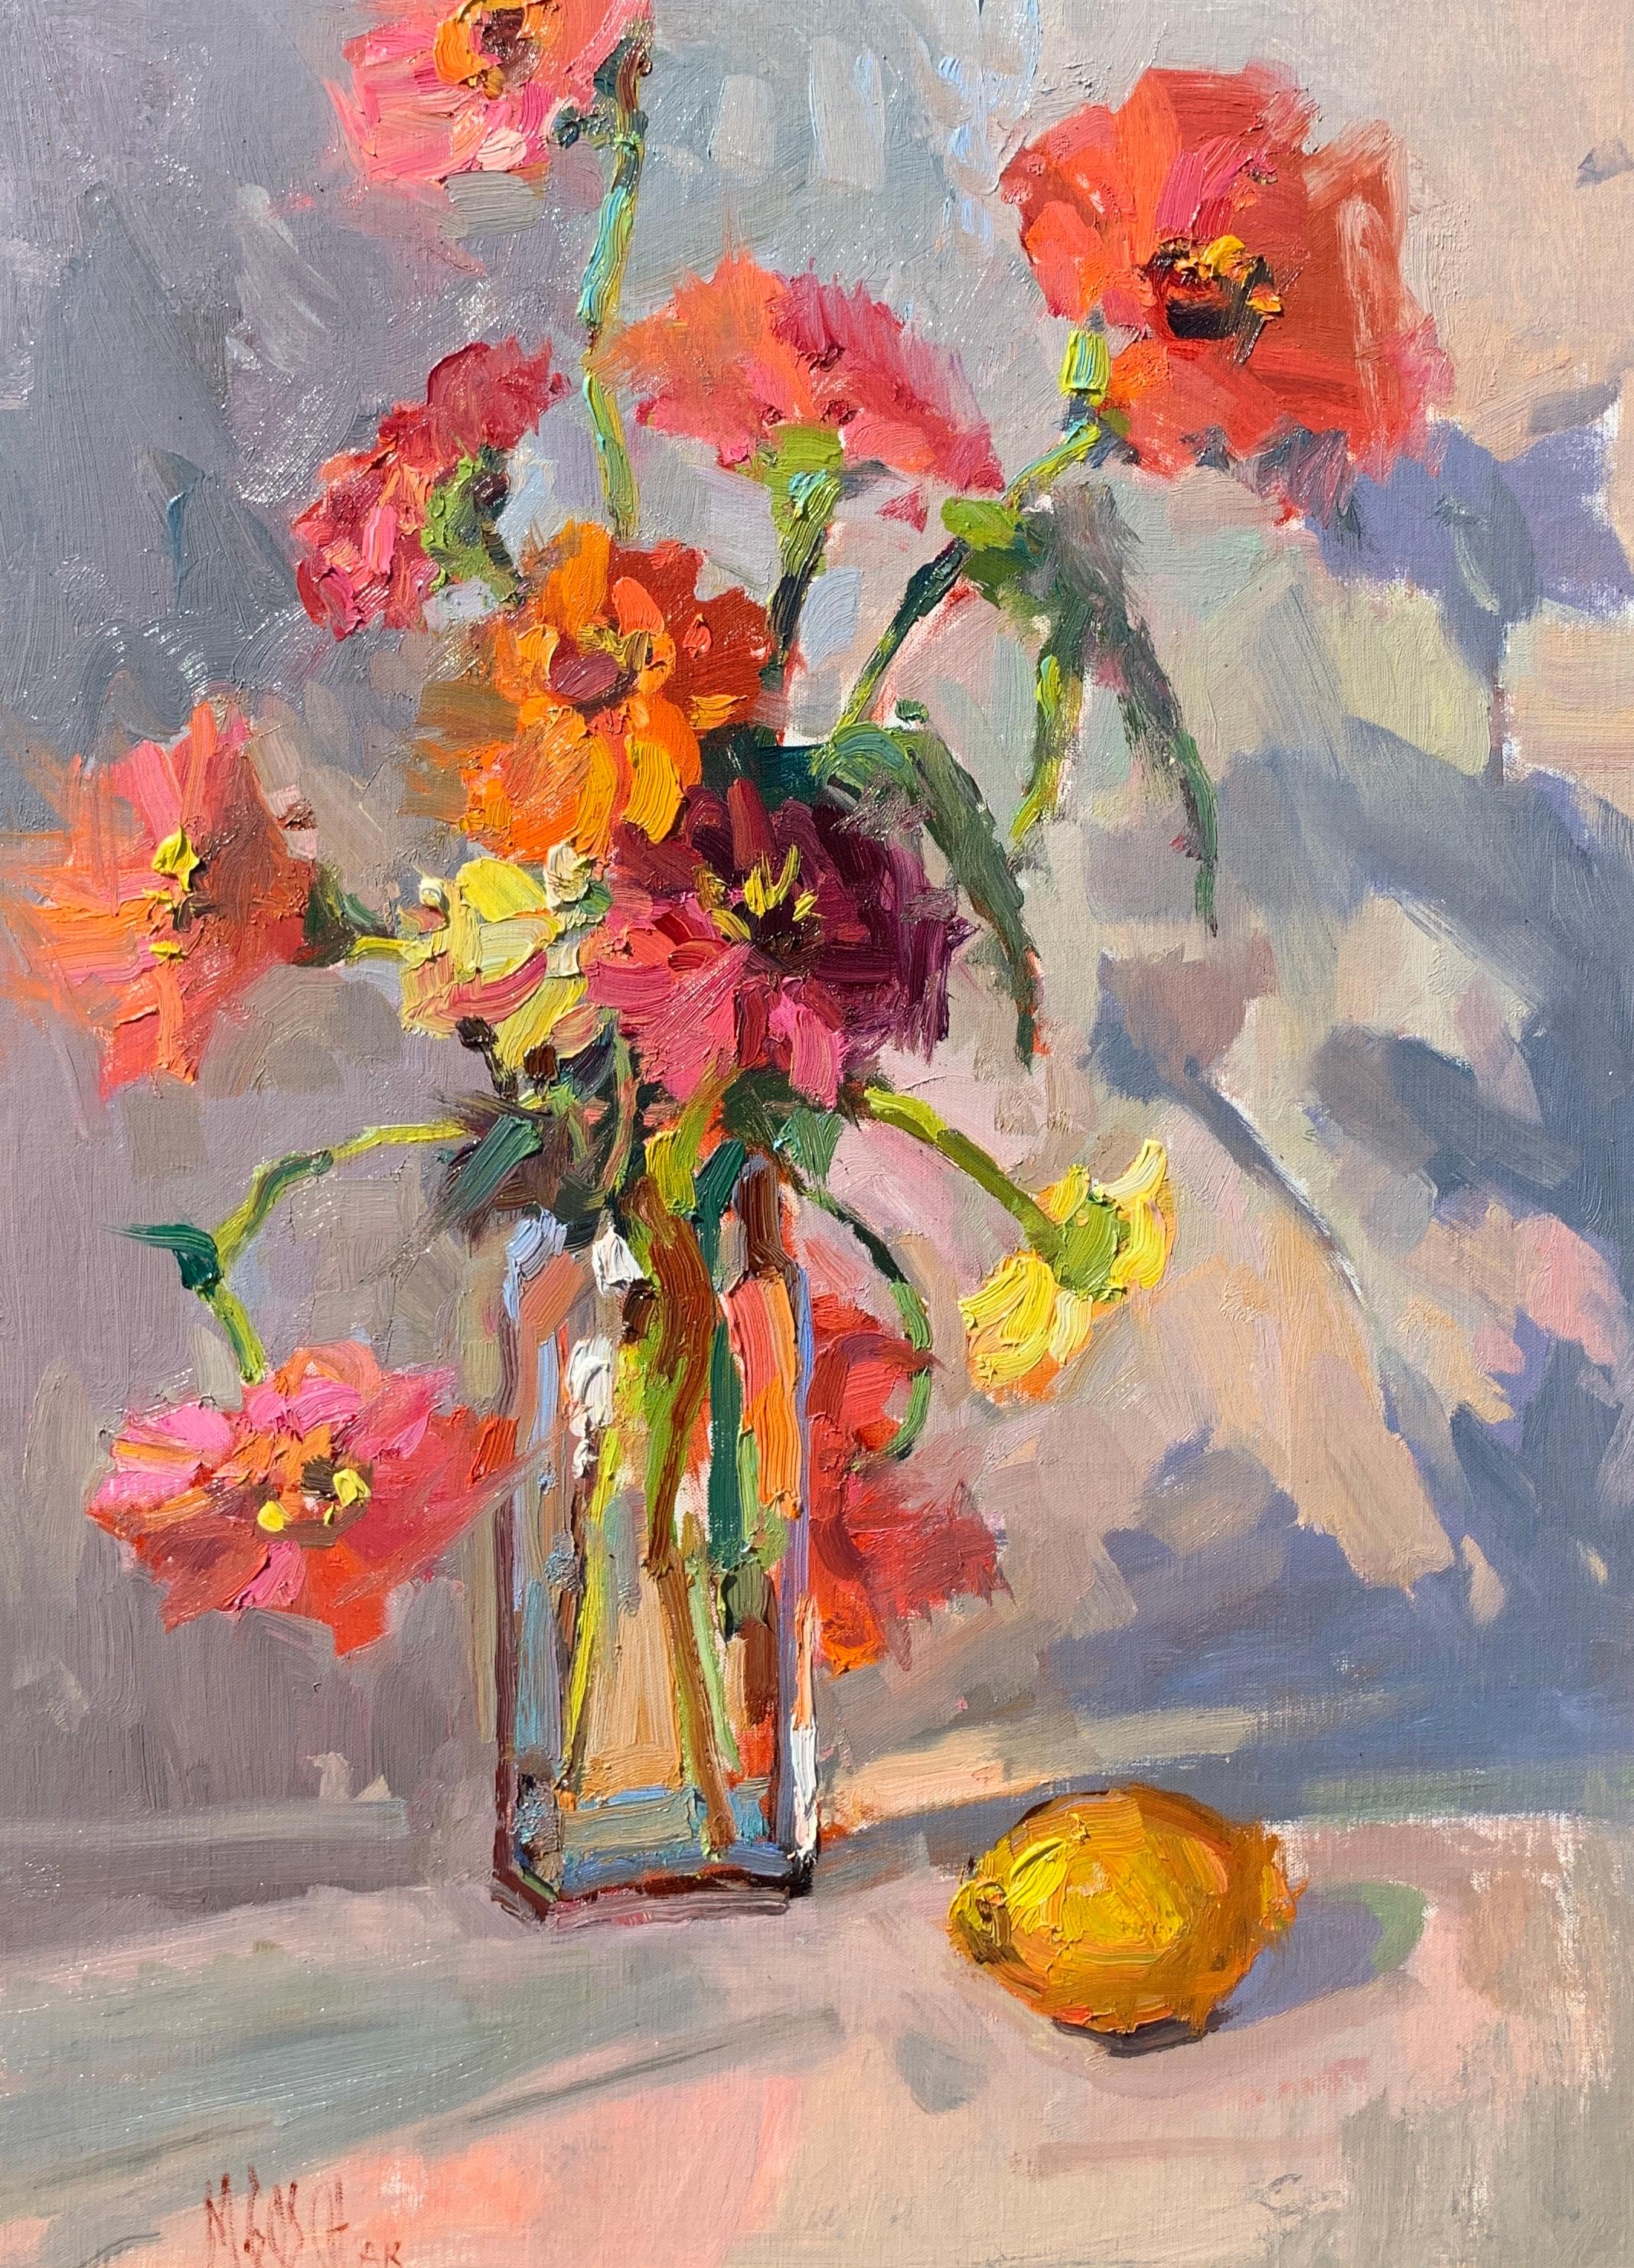 'And a Lemon' is an Impressionist framed oil on board still-life painting created by American artist Millie Gosch in 2019. Featuring a palette made of red, orange, yellow, purple and grey tones among others, this still-life painting depicts a